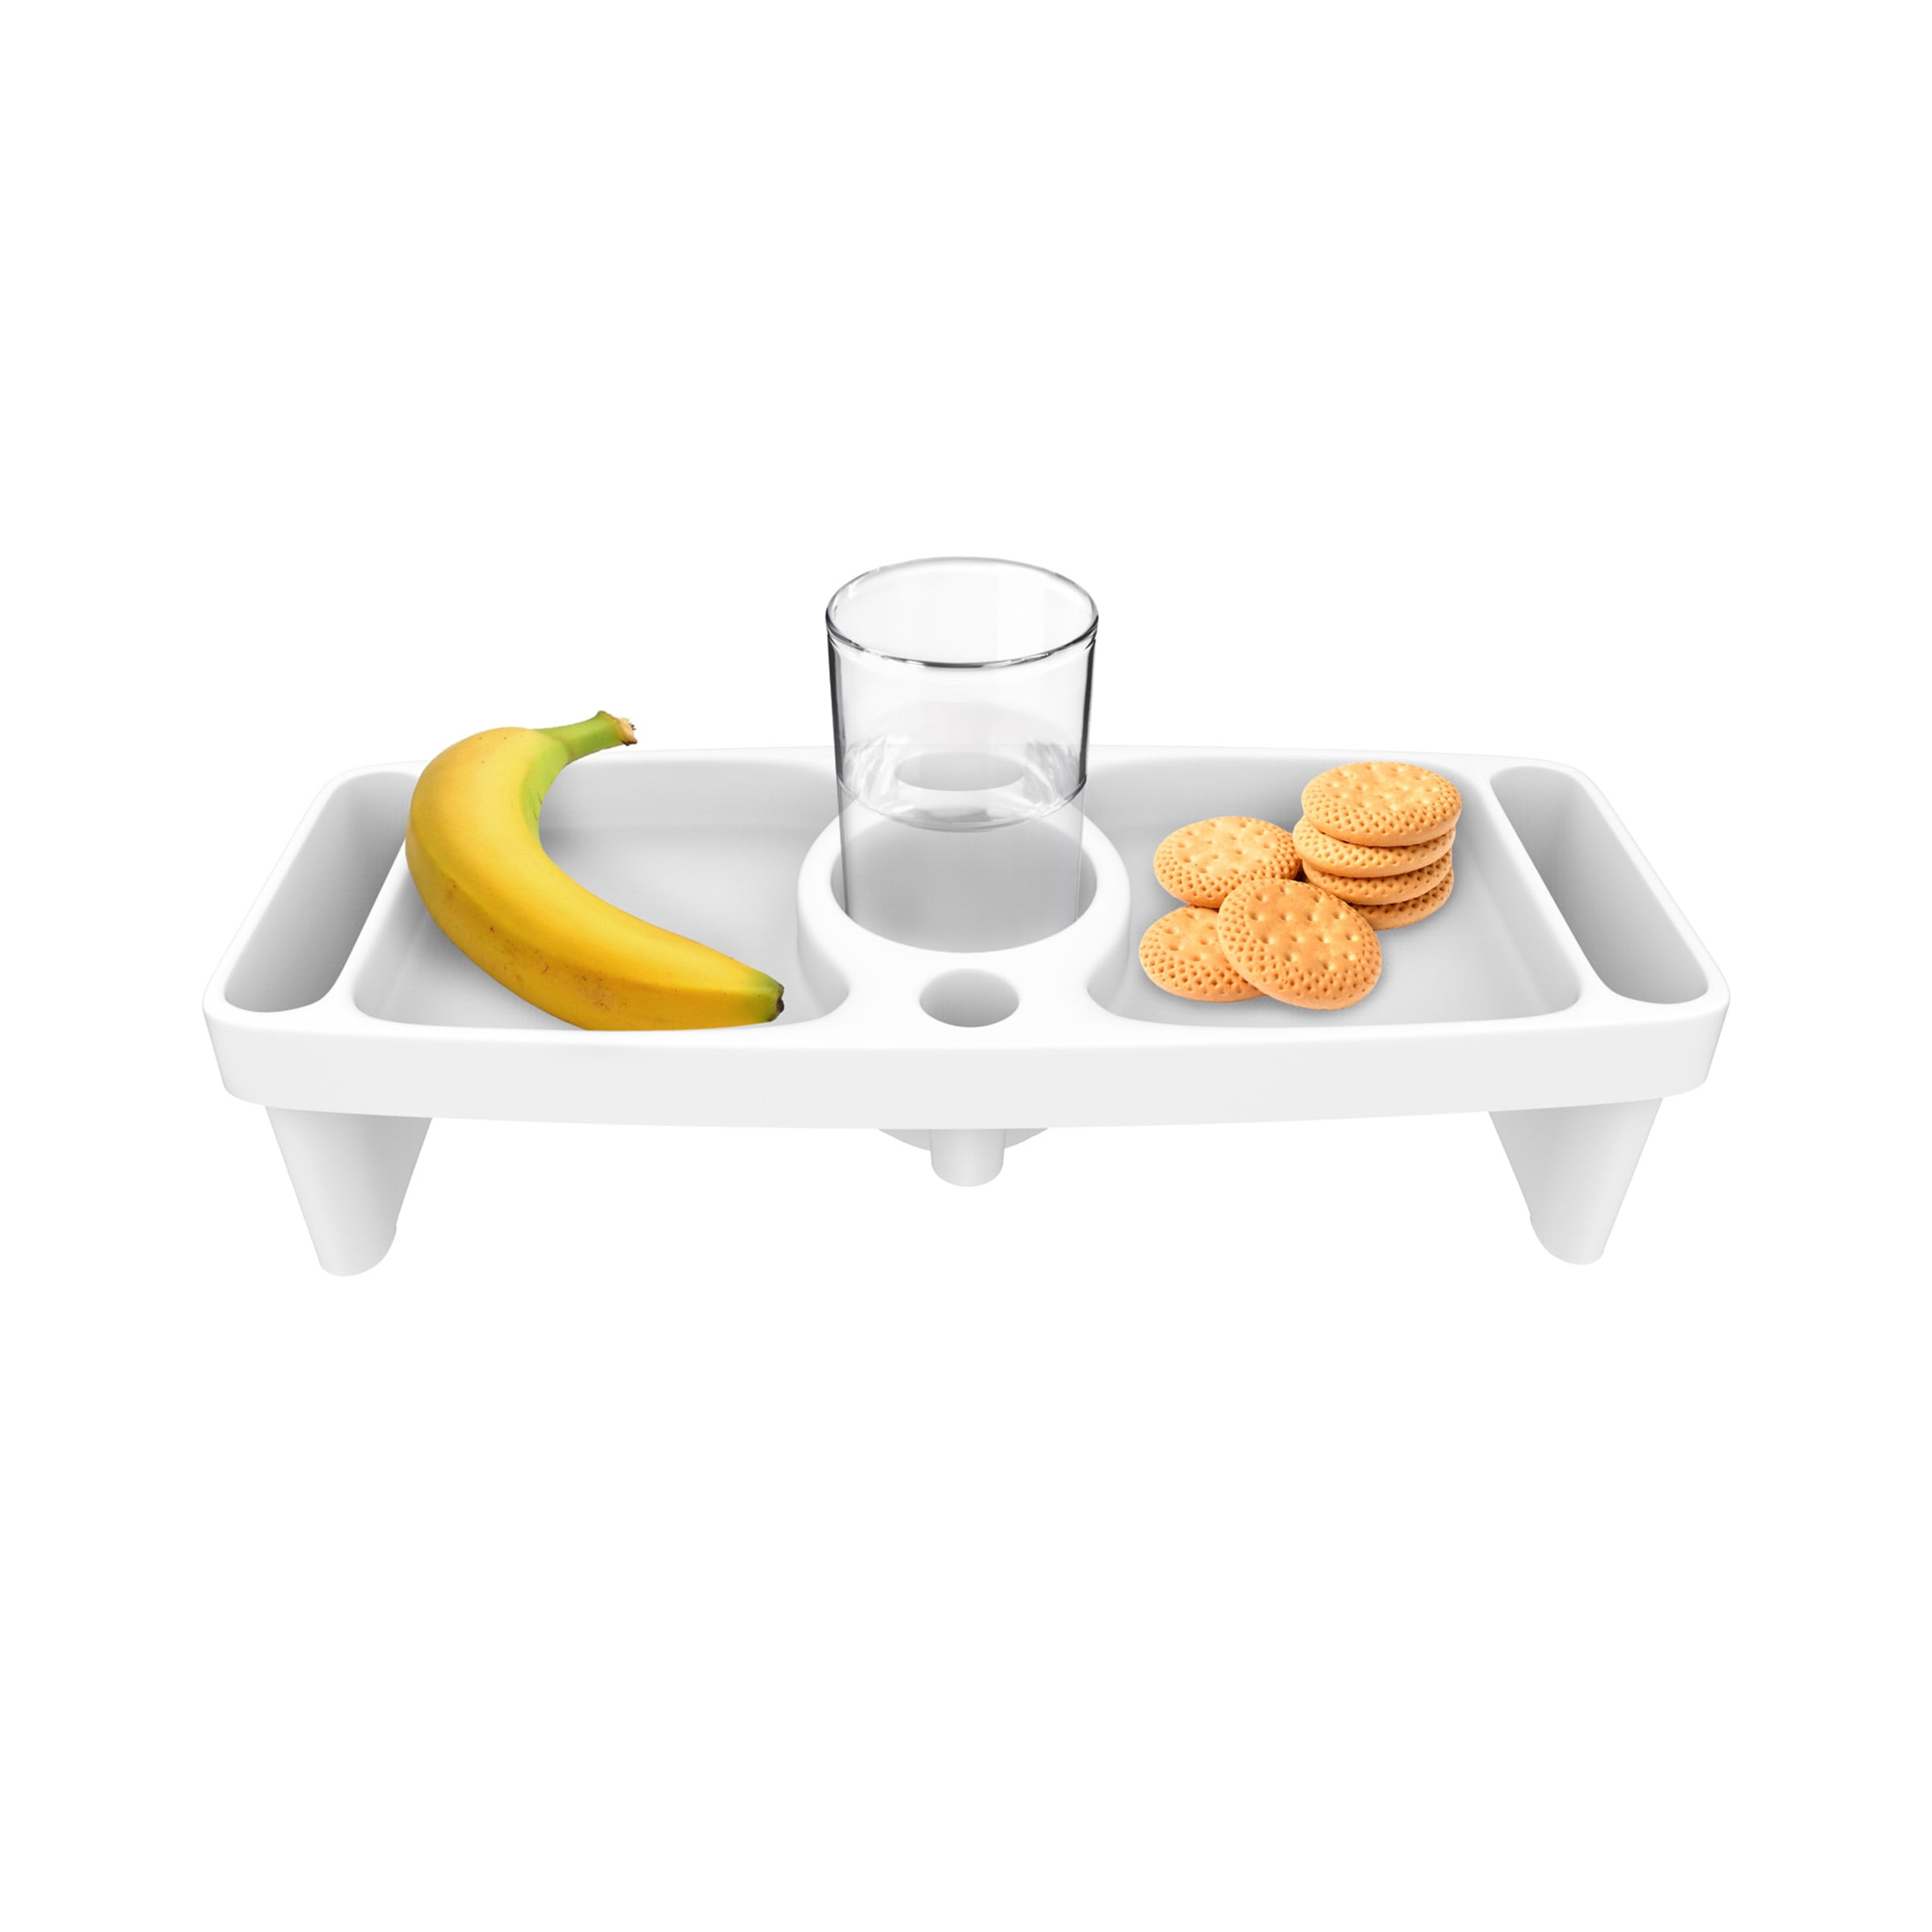 Lap Tray with Cupholder, Side Compartments-For Eating, Drinking, Snacking  on Bed, Couch, Chair- Serve Breakfast, Lunch, Dinner Anywhere by Bluestone